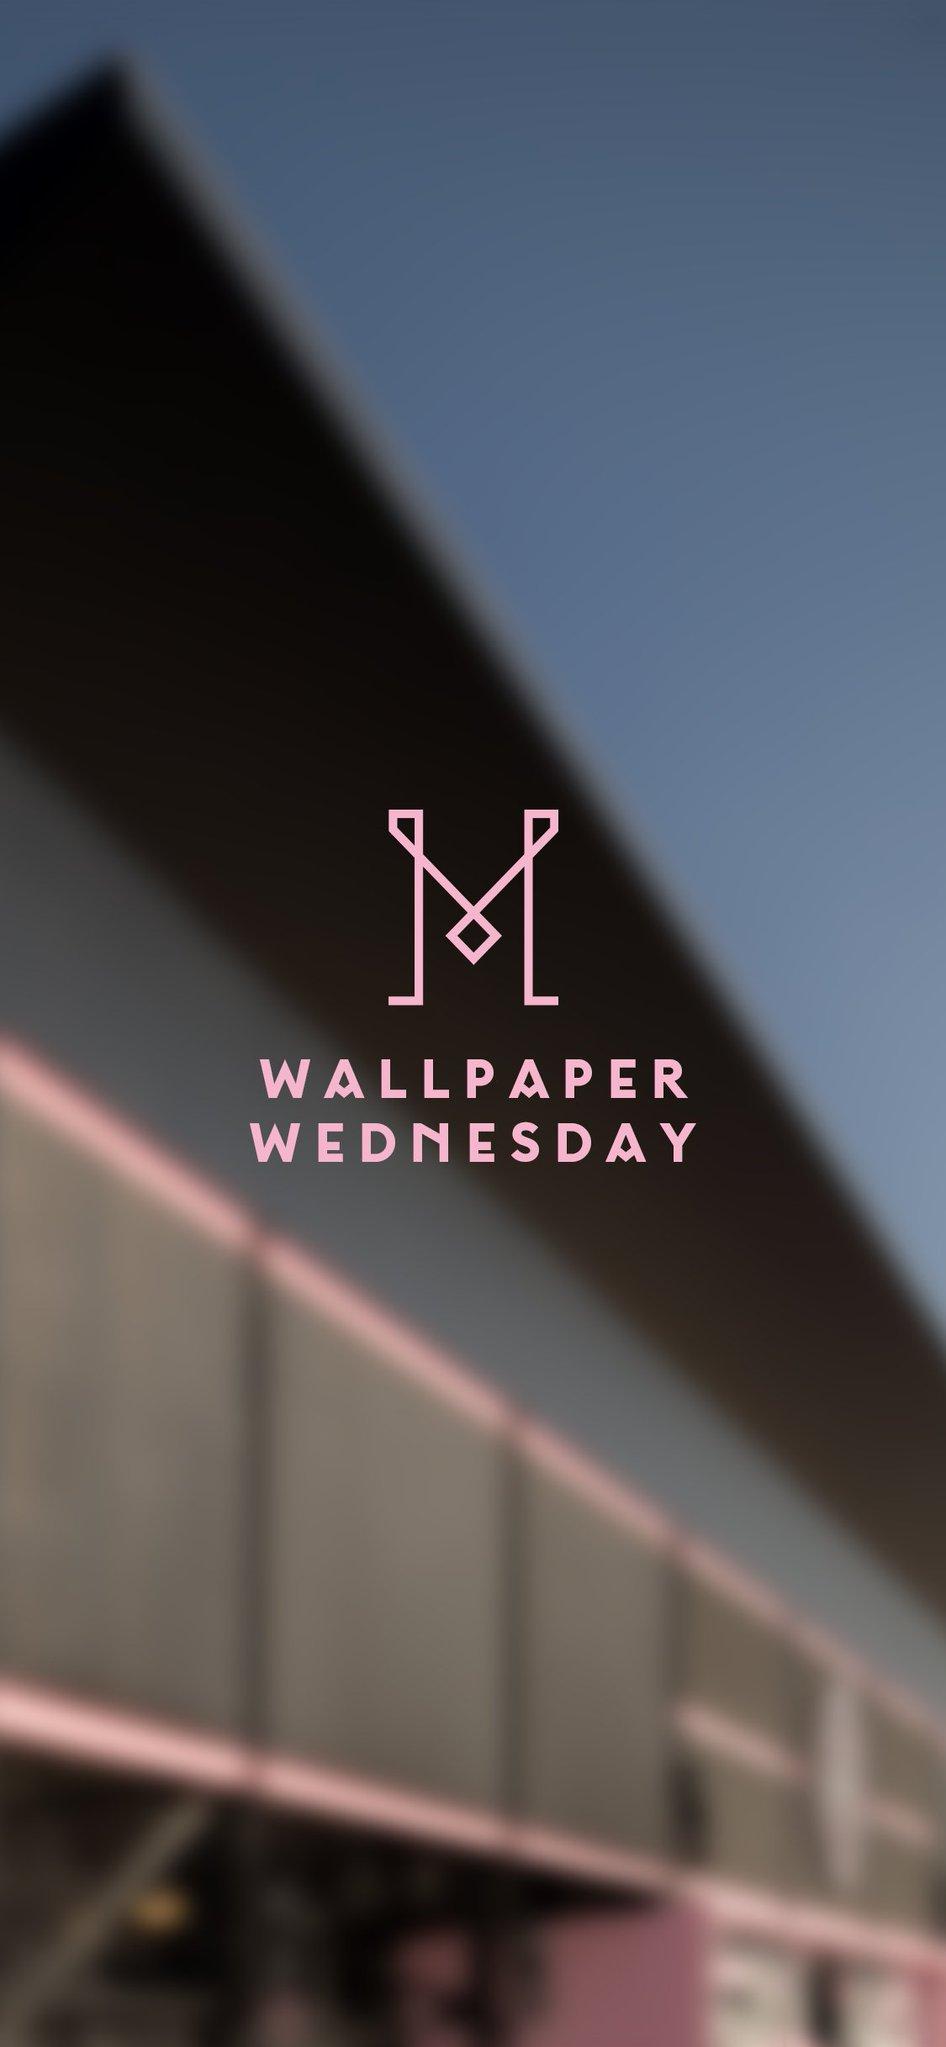 Inter Miami Cf On Wallpaperwednesday Ing In Clutch